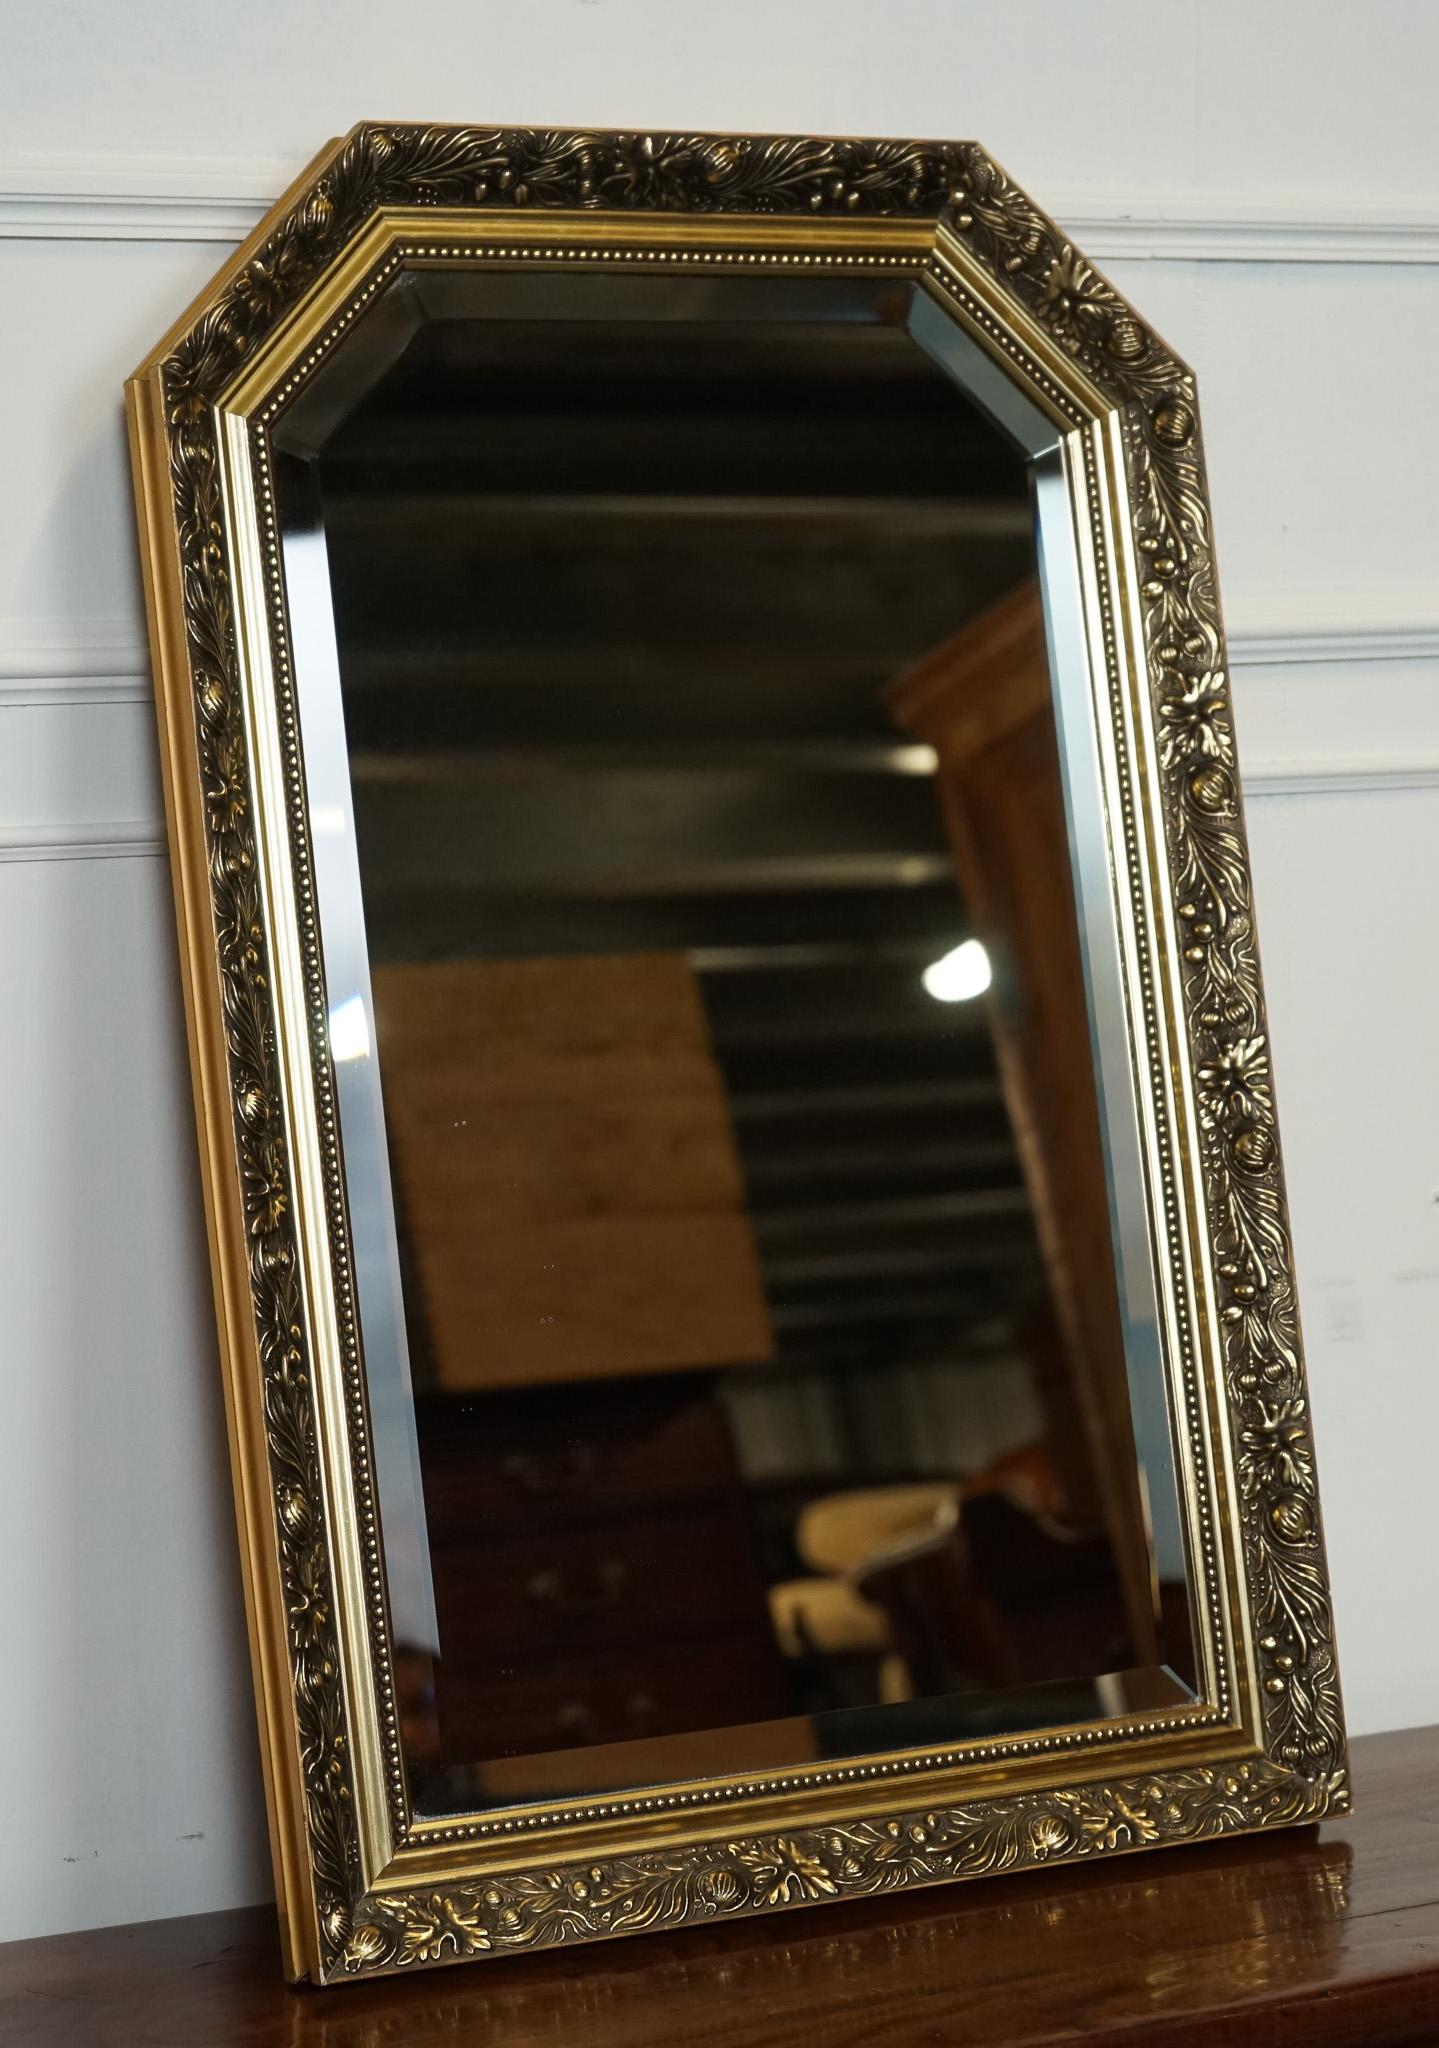 
We are delighted to offer for sale this Vintage Gold Ornate Bevelled Mirror.

Please carefully examine the pictures to see the condition before purchasing, as they form part of the description. If you have any questions, please message us.